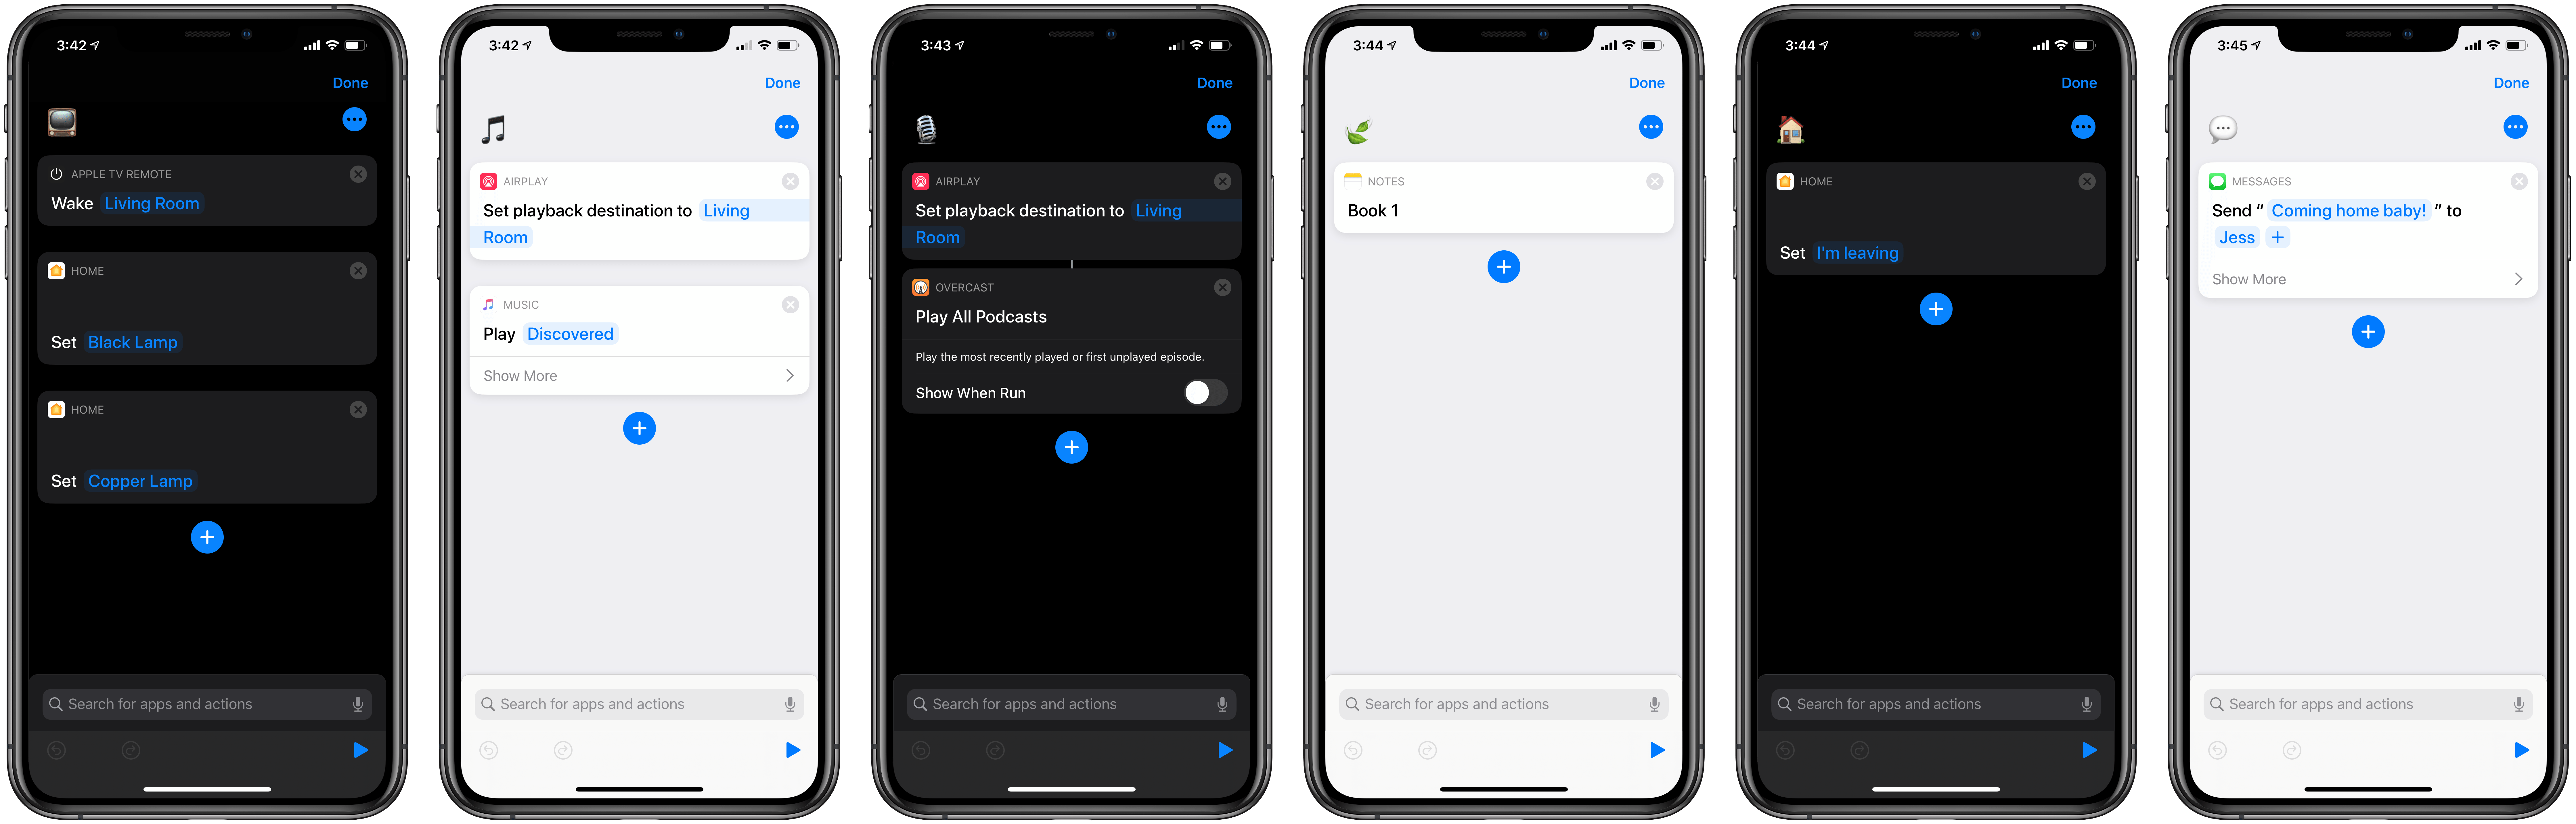 My Home screen shortcuts, some of which have iOS 13-exclusive actions.